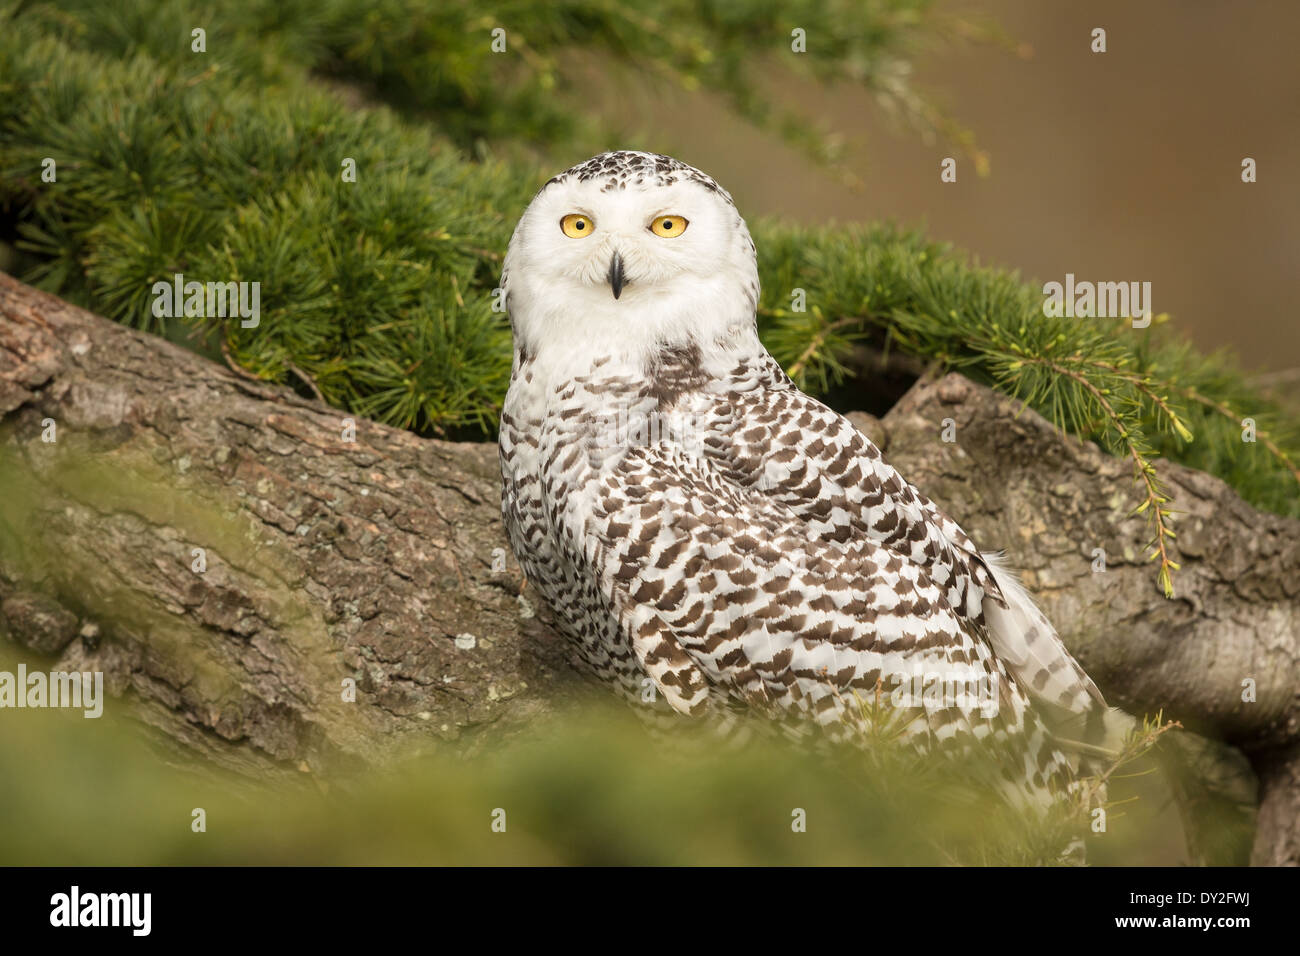 Adult Snowy Owl (Bubo scandiacus) in a fir tree (Abies) Stock Photo